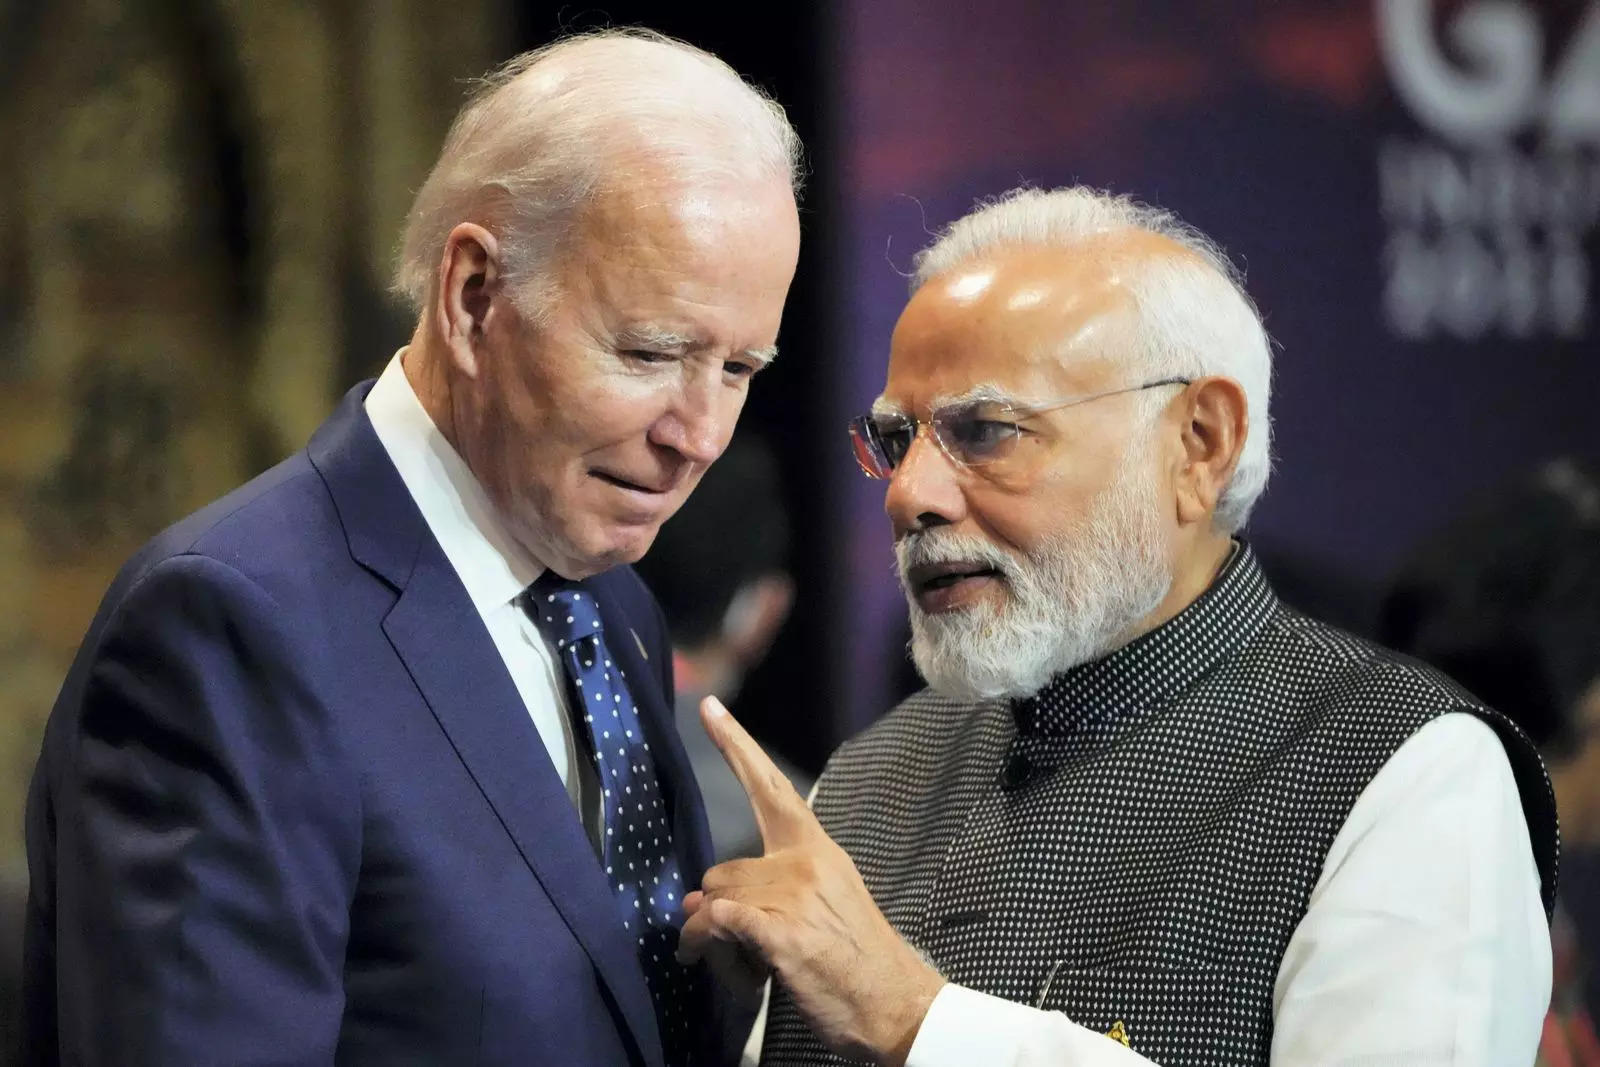 India-US Relations And Revival of Non-Alignment Philosophy